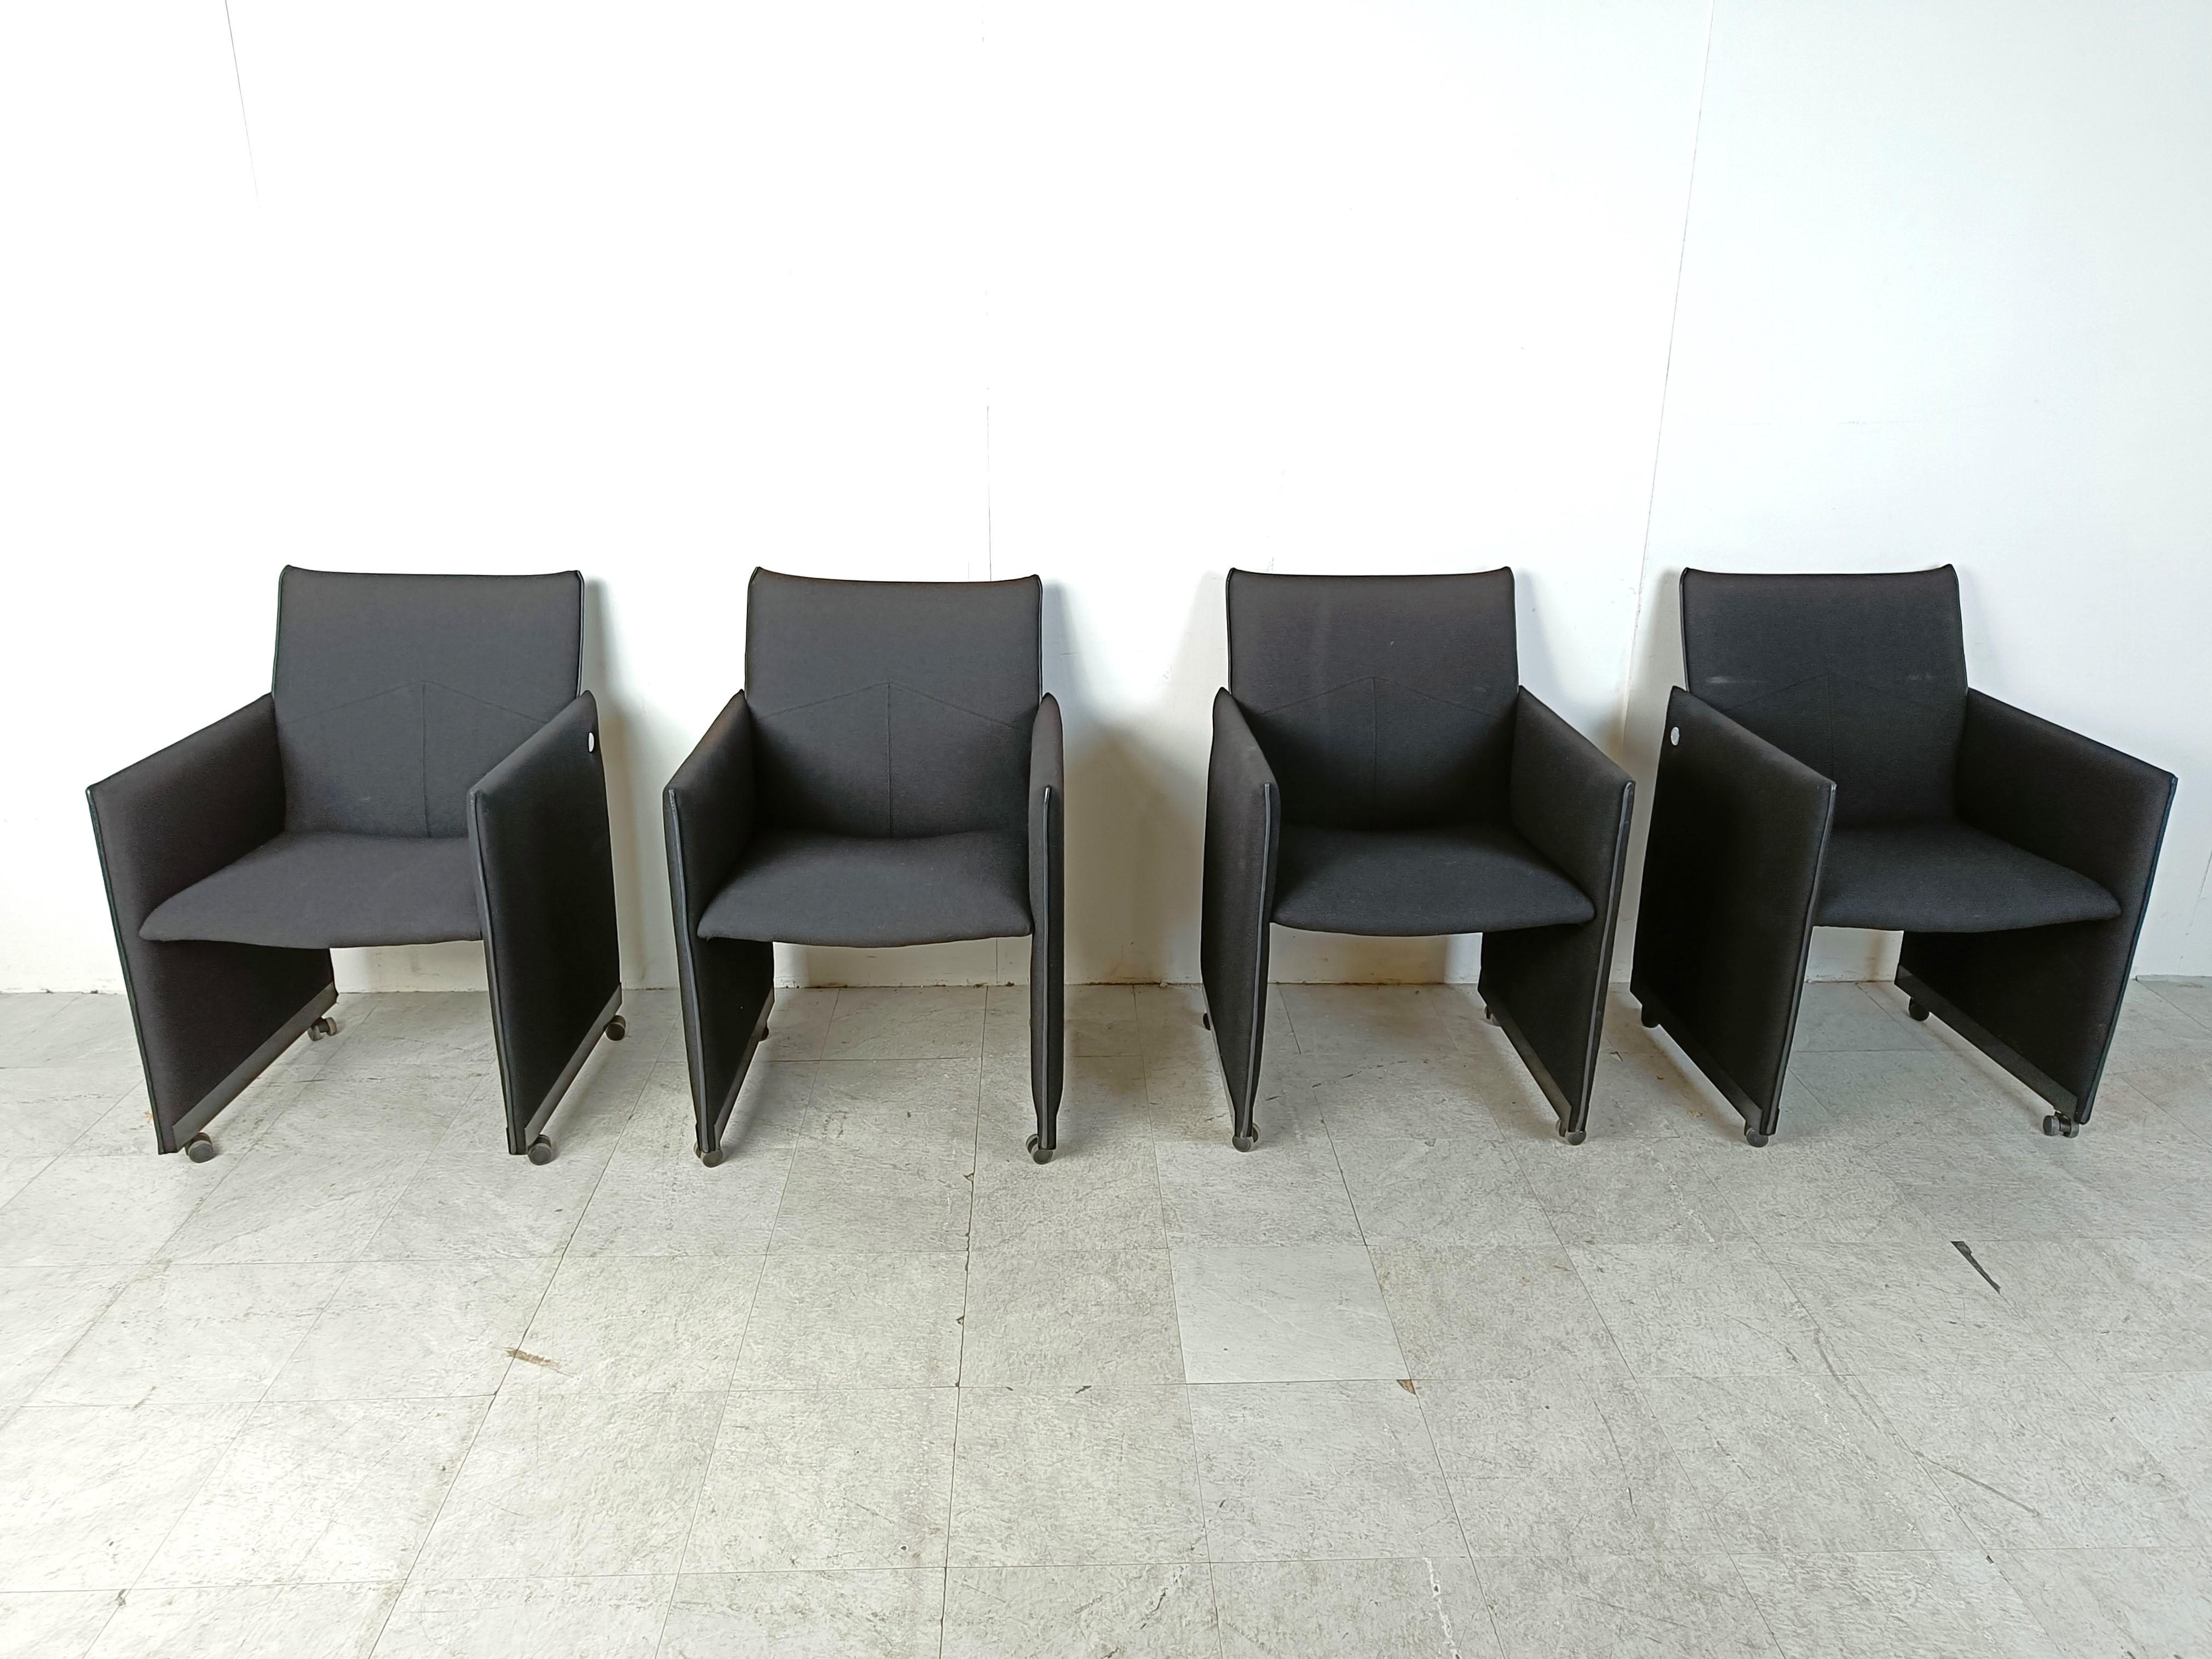 Modern Montana armchairs by Geoffrey Harcourt for Artifort, 1990s - set of 4 For Sale